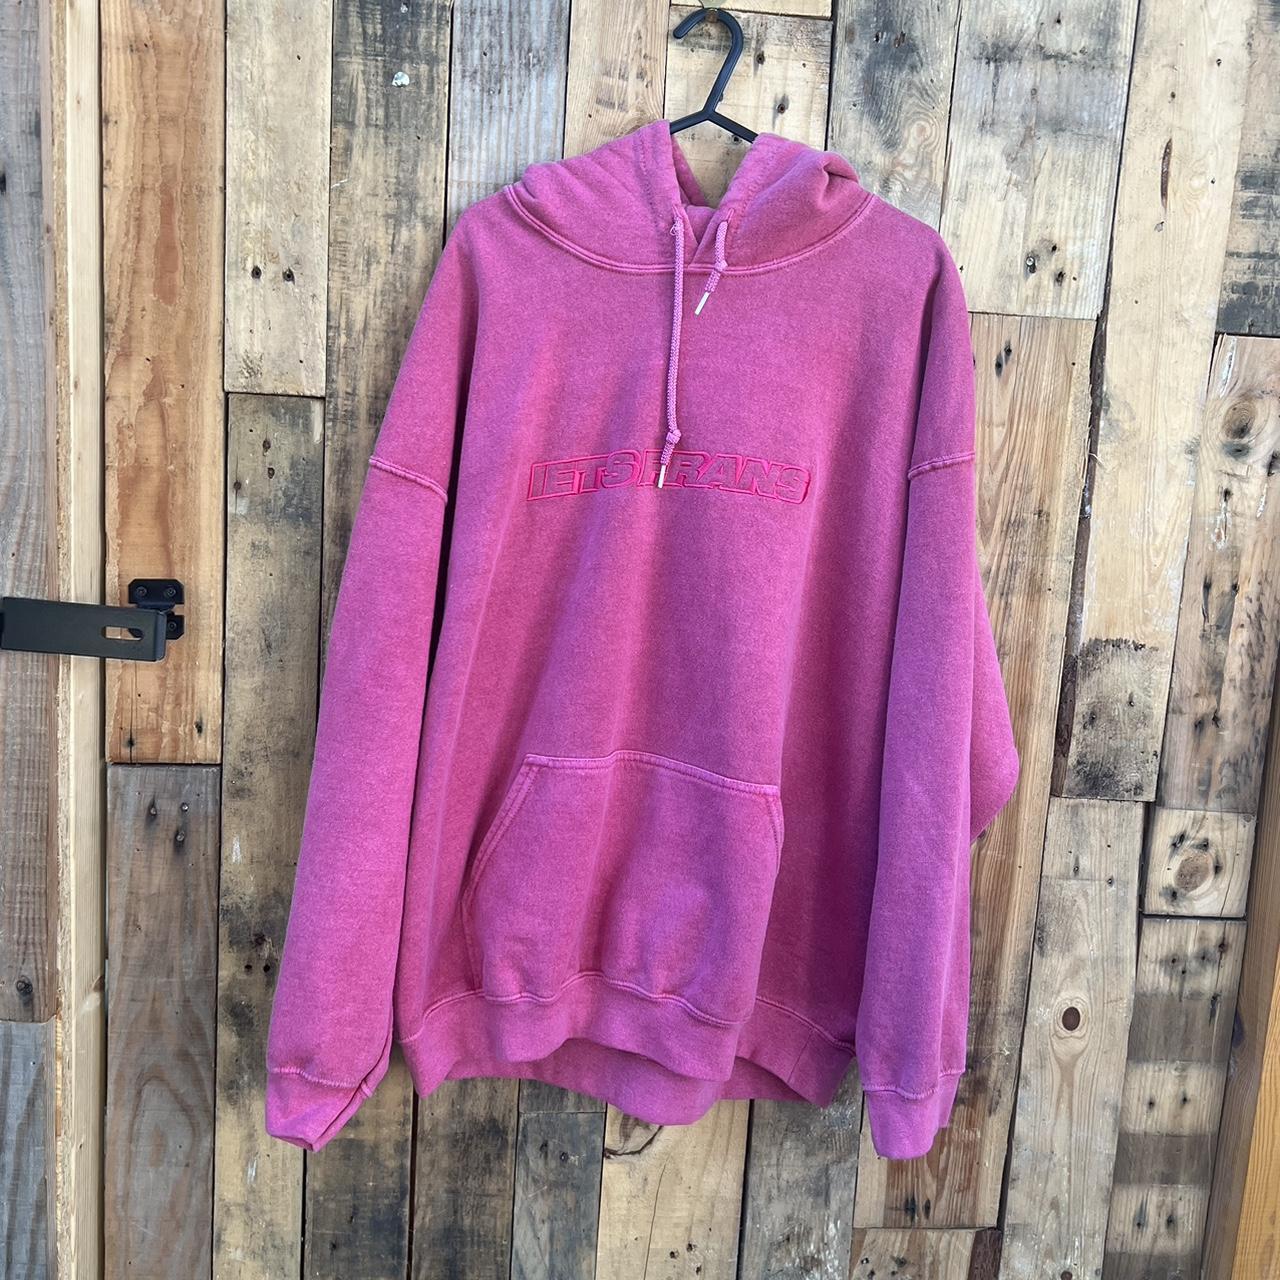 Urban outfitters hoodie Size M New with tags - Depop